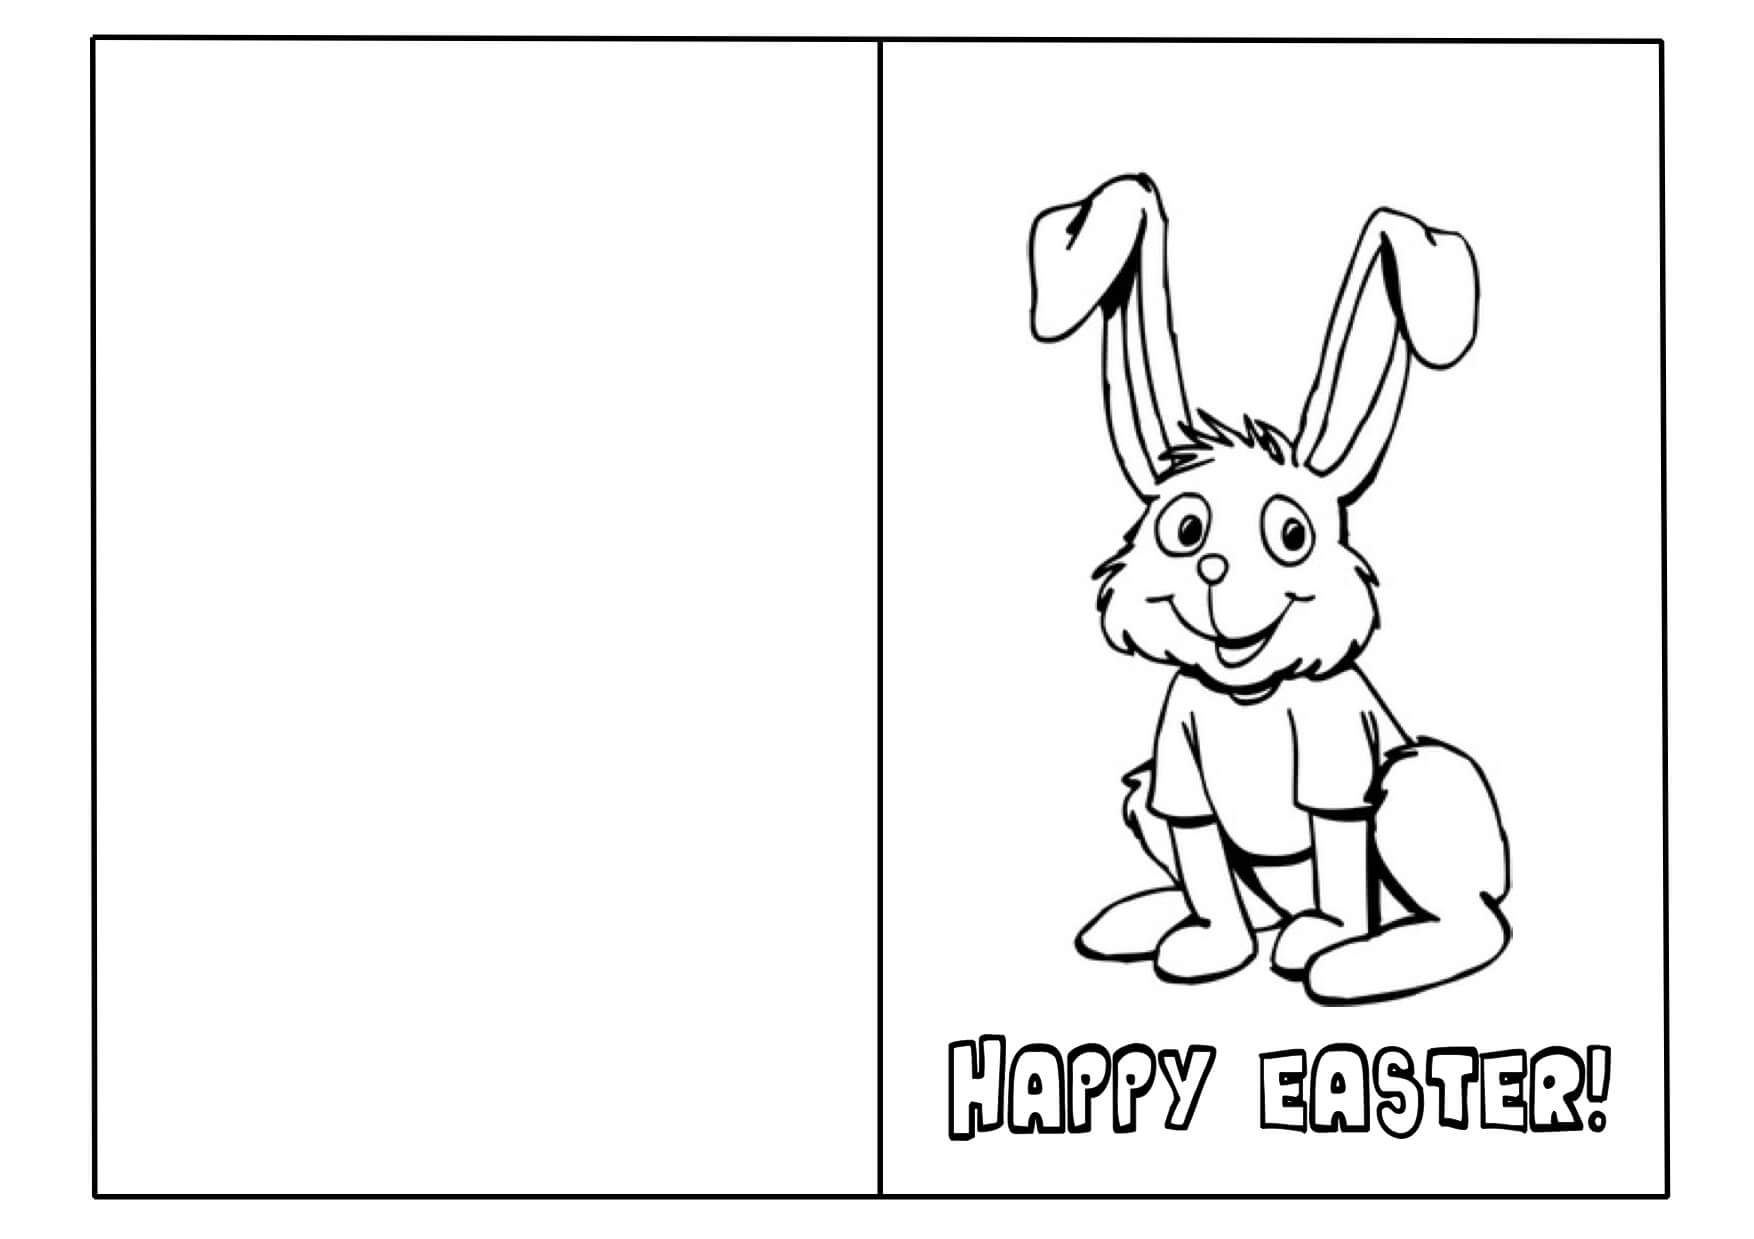 Easter Card Template Ks2 1 – Happy Easter Sunday Pertaining To Easter Card Template Ks2